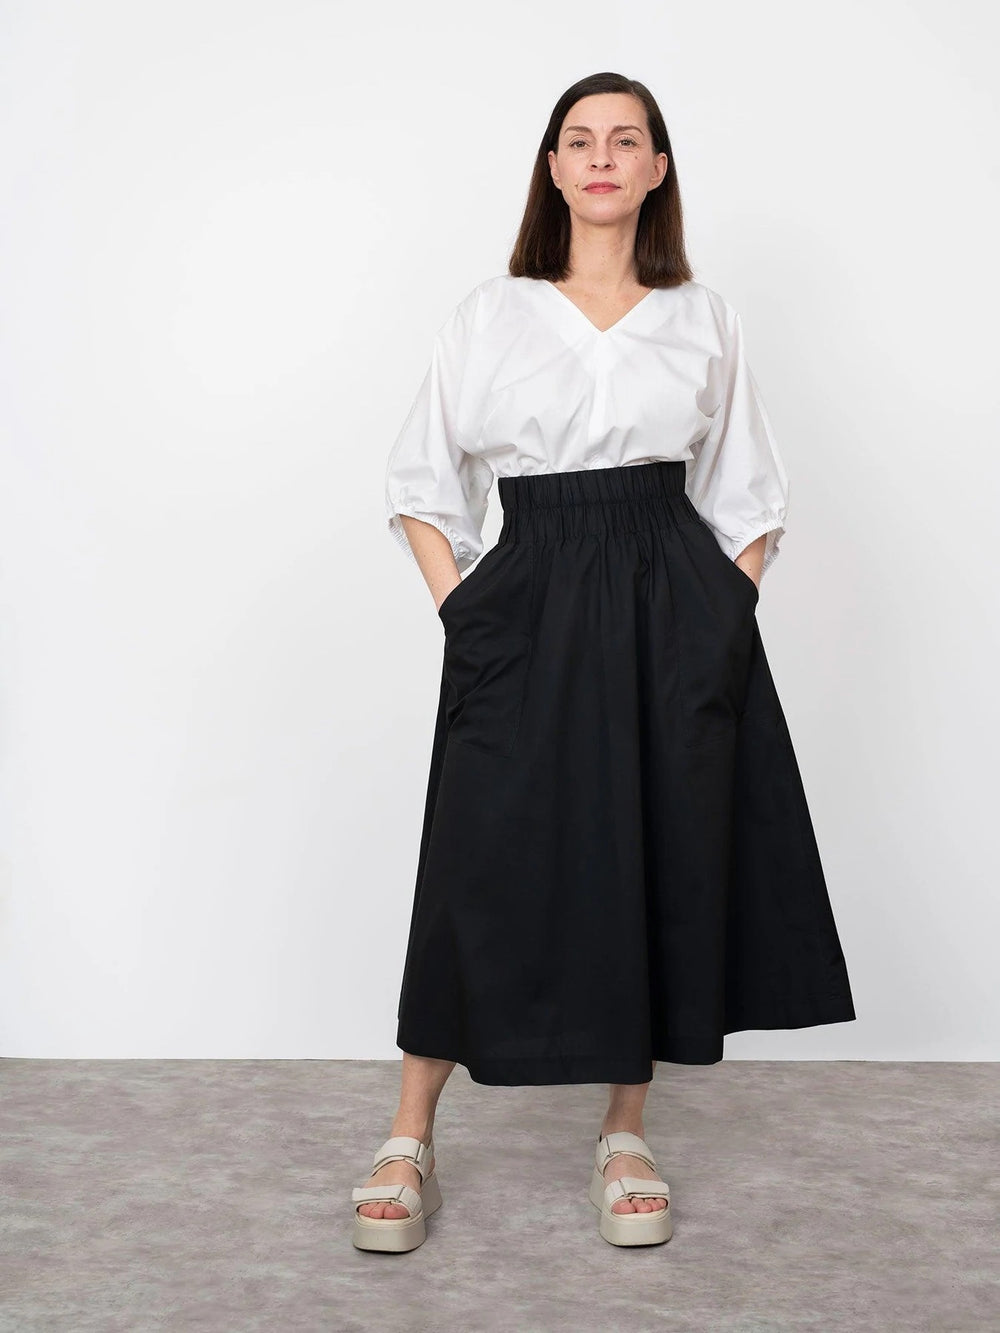 Woman wearing the V-neck Cuff Top sewing pattern from The Assembly Line on The Fold Line. A top pattern made in cotton, silk, lawn, linen, crepe de chine or wool crepe fabrics, featuring a V-neck, full gathered sleeves with elasticated mid length cuffs an